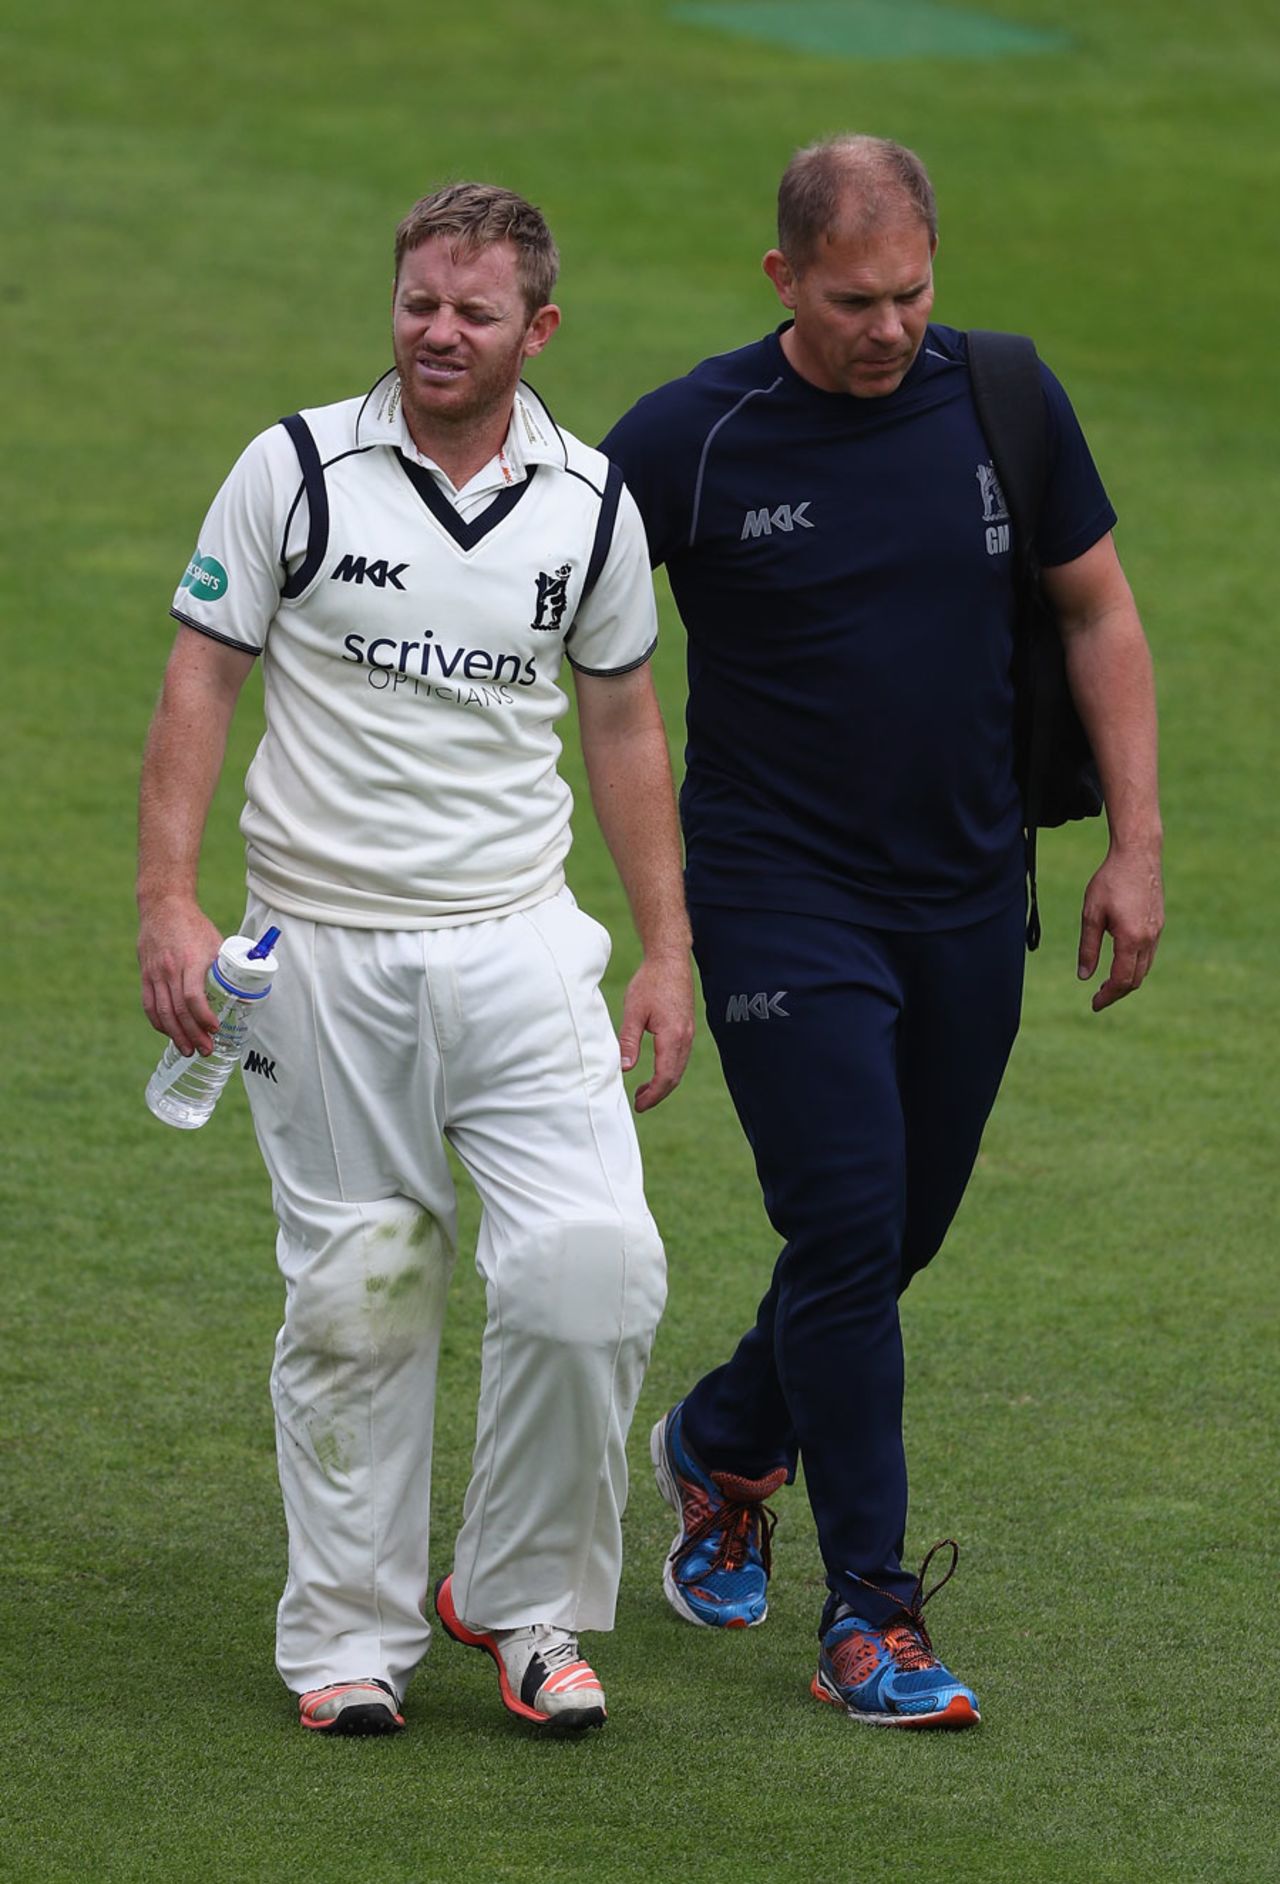 Ian Westwood was struck a blow on the head fielding at short leg, Warwickshire v Middlesex, County Championship, Division One, Edgbaston, 1st day, August 31, 2016